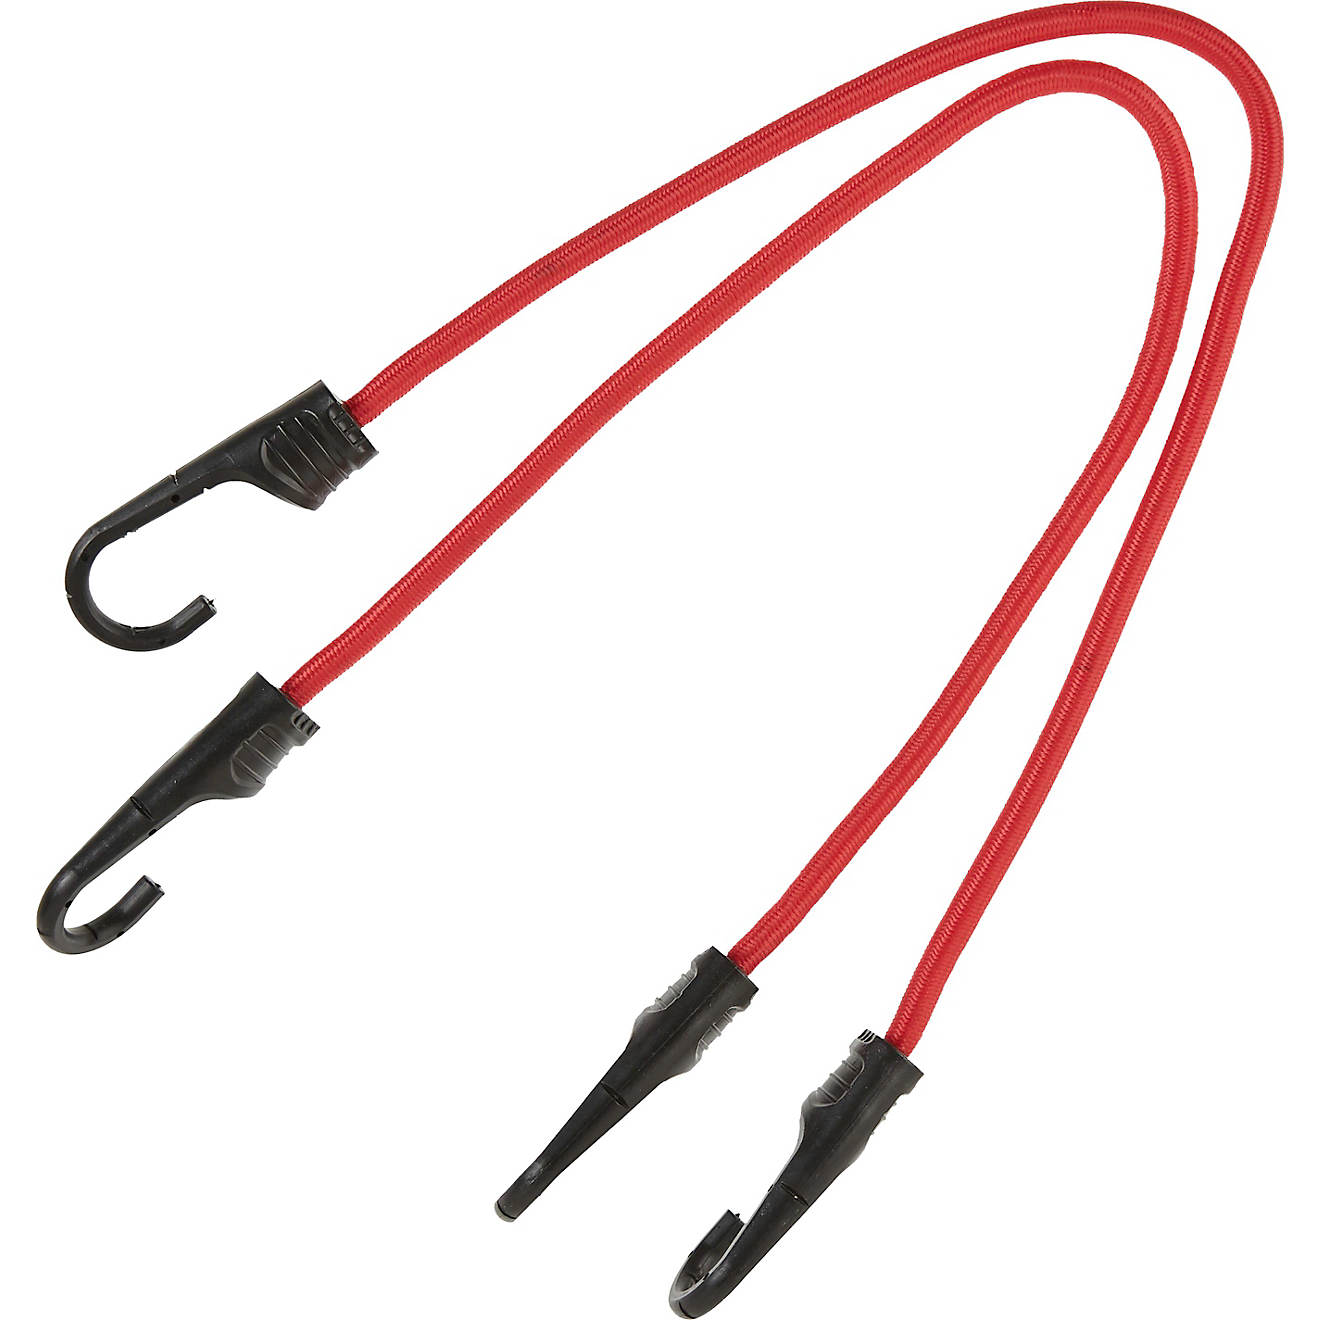 CargoLoc 24 in Injection Molded Bungee Cords 2-Pack | Academy